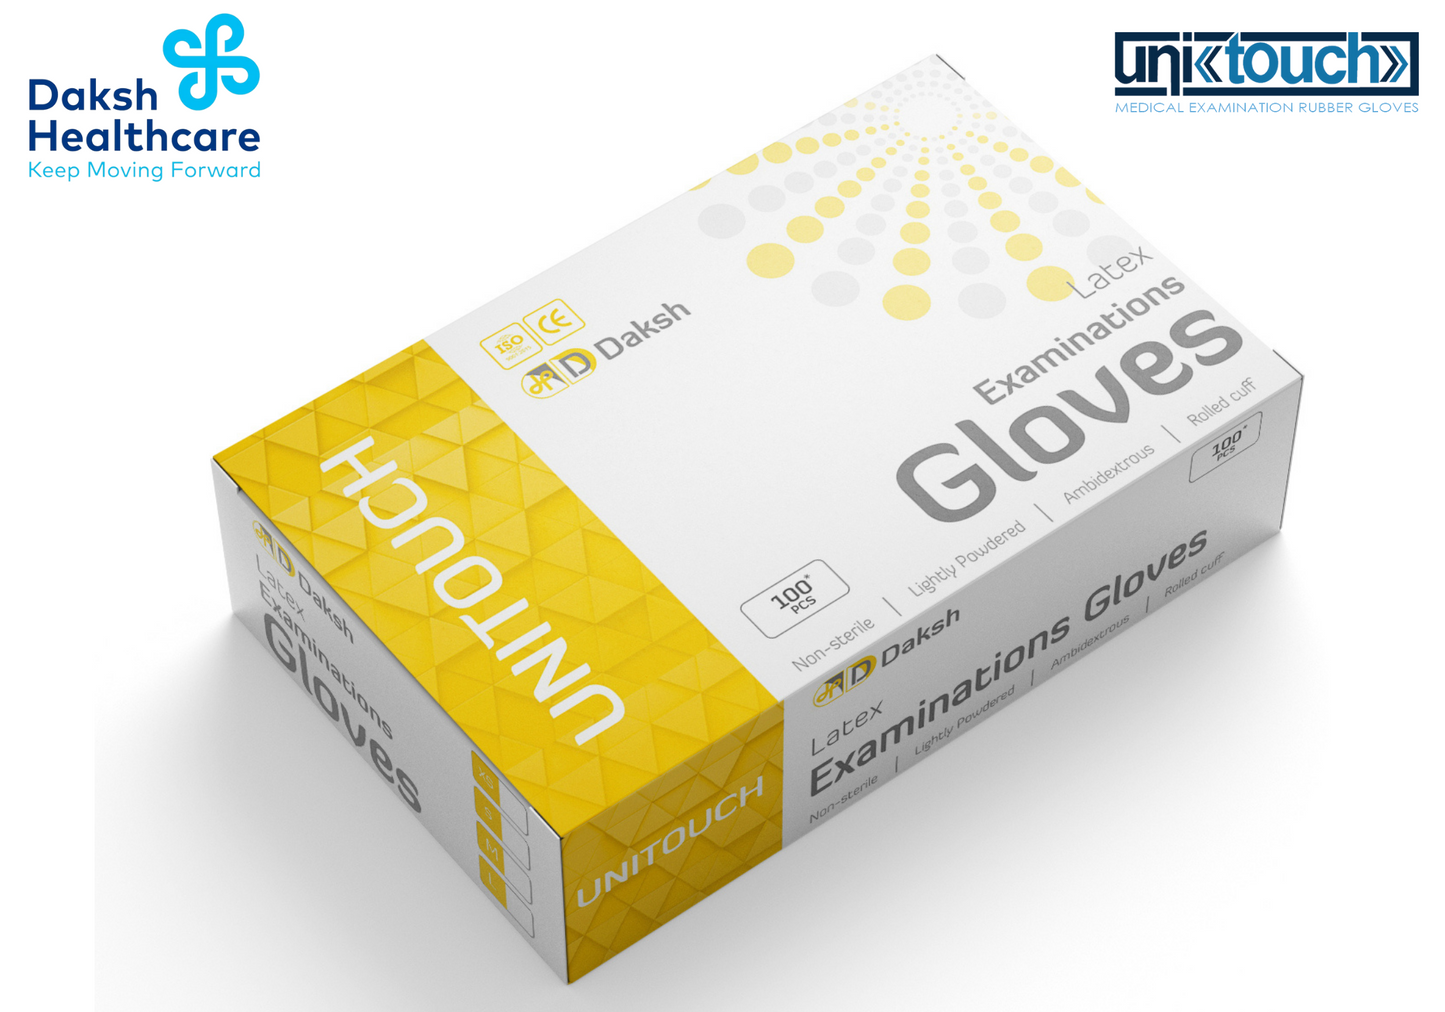 Unitouch Latex Powdered Examination Gloves Pack of 100 Pcs